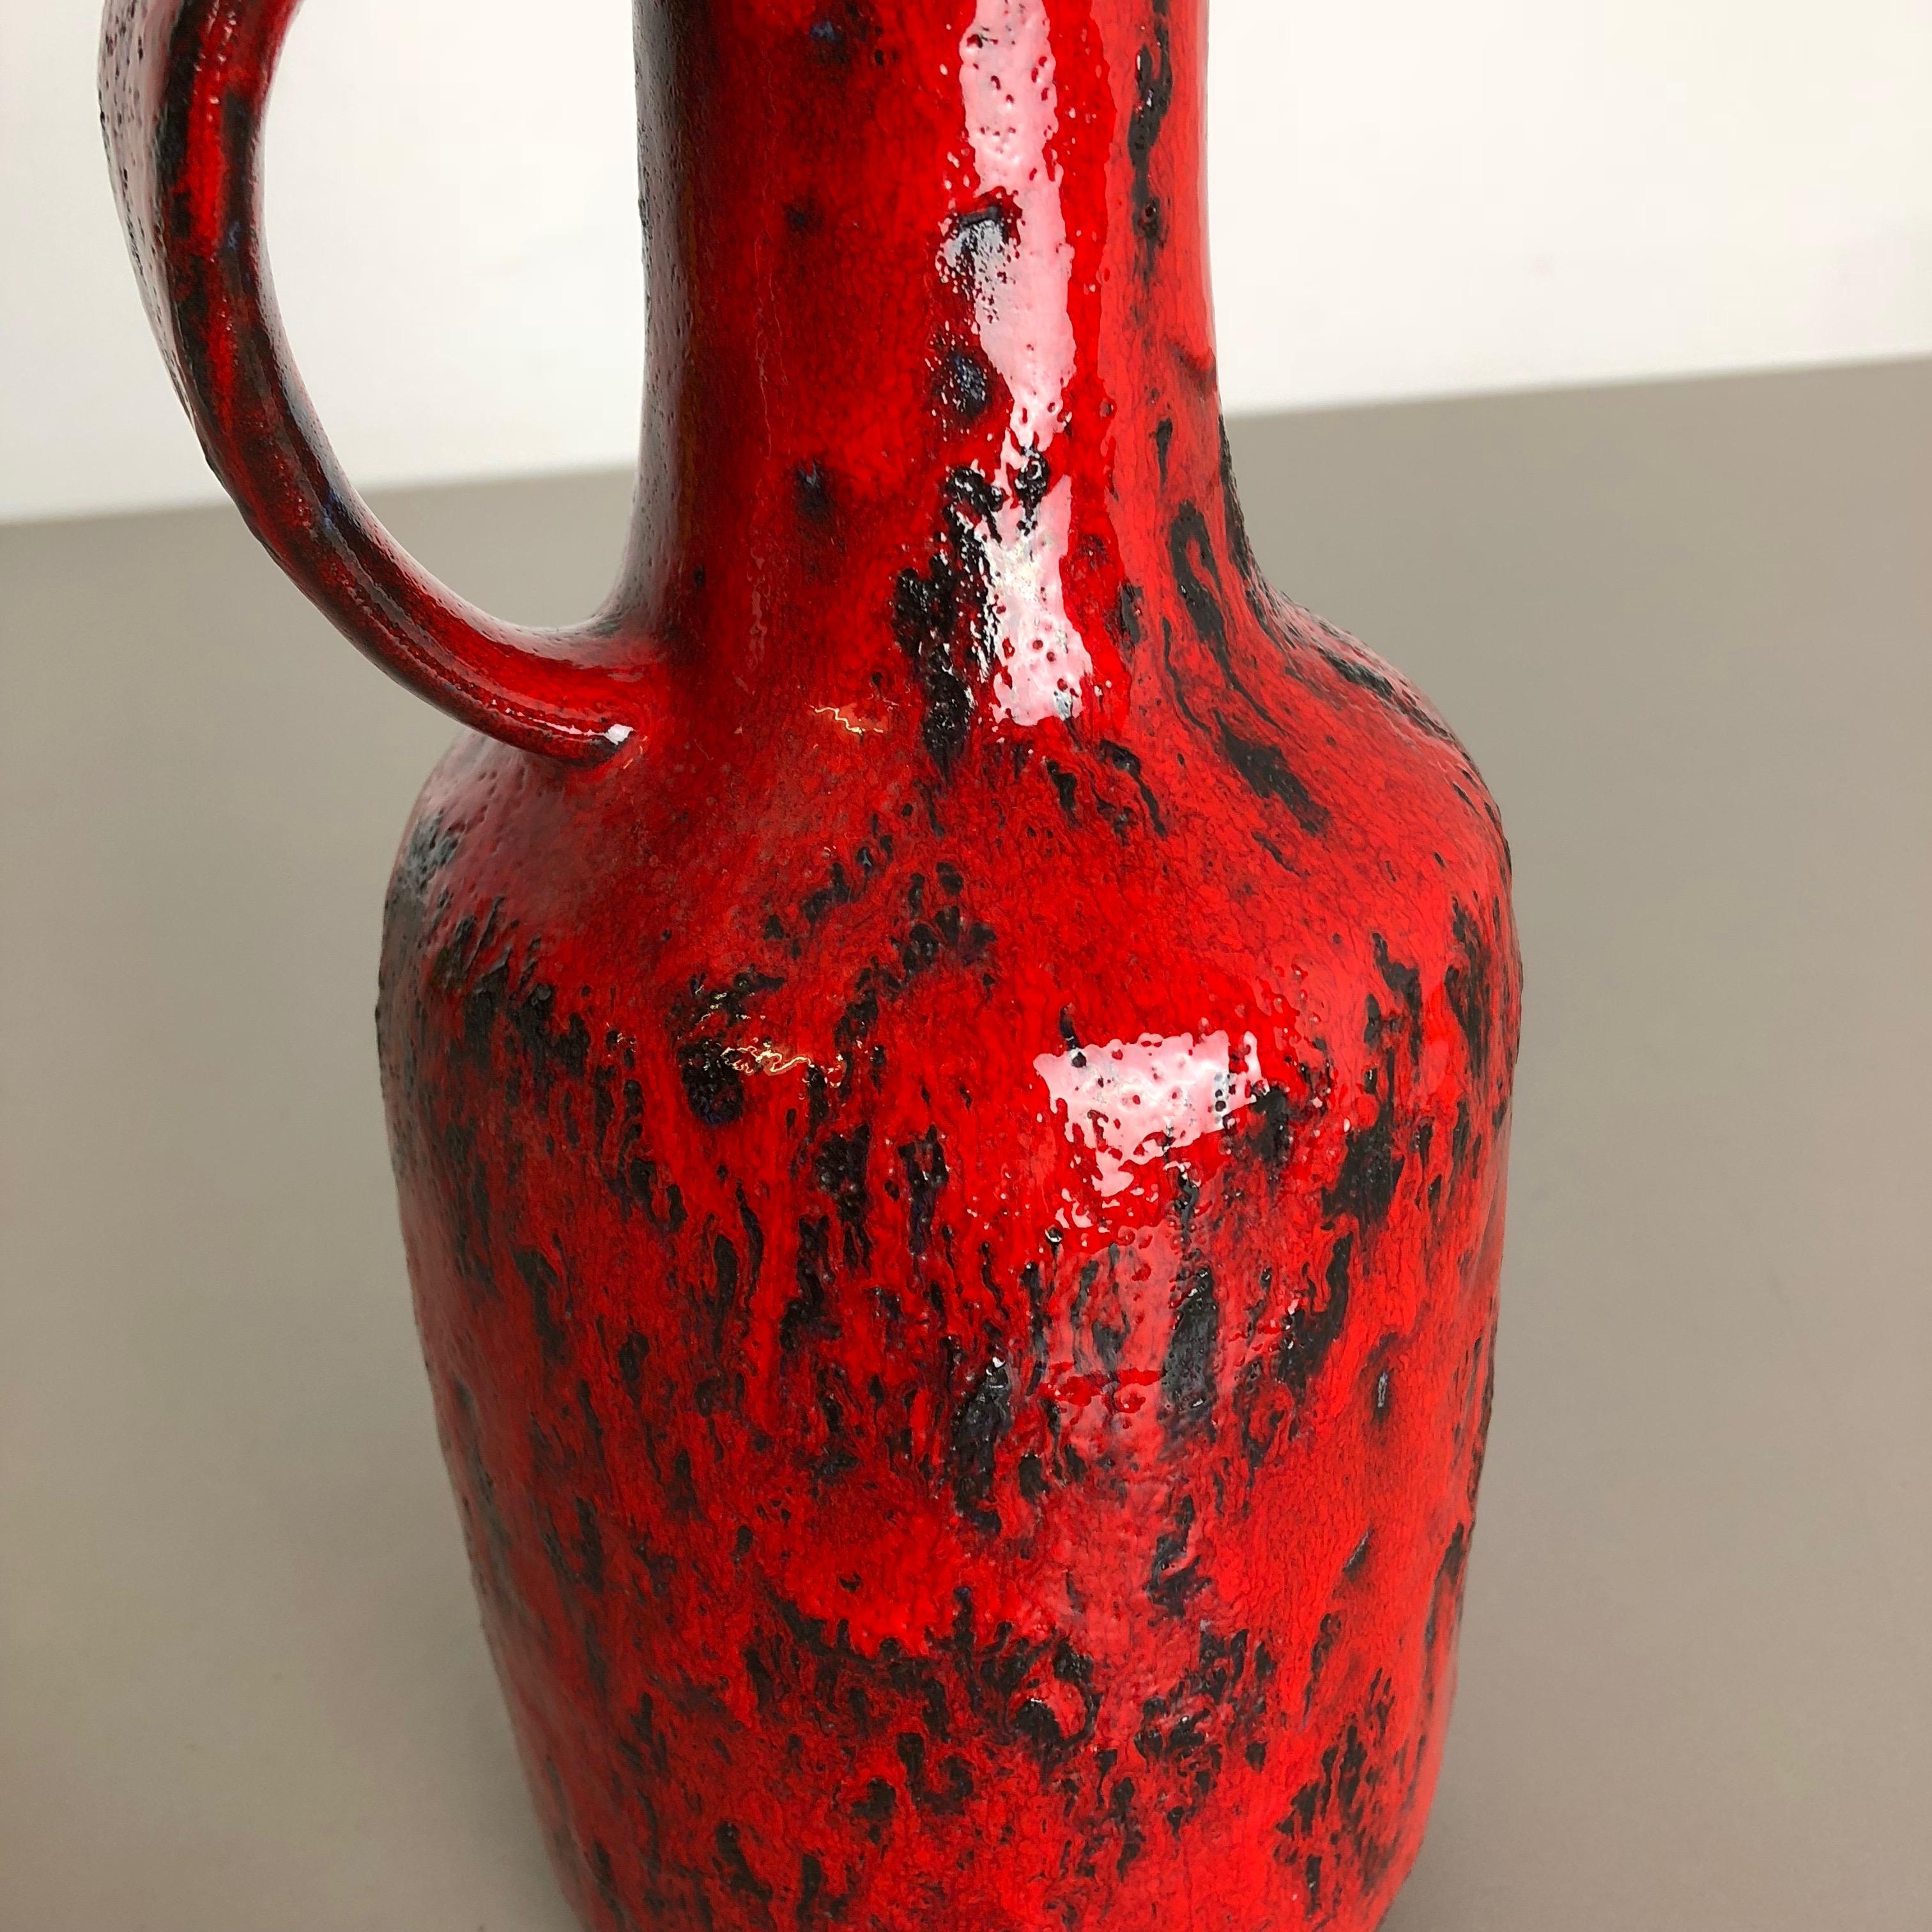 Super Colorful Fat Lava Pottery Vase by Gräflich Ortenburg, Germany, 1950s For Sale 3